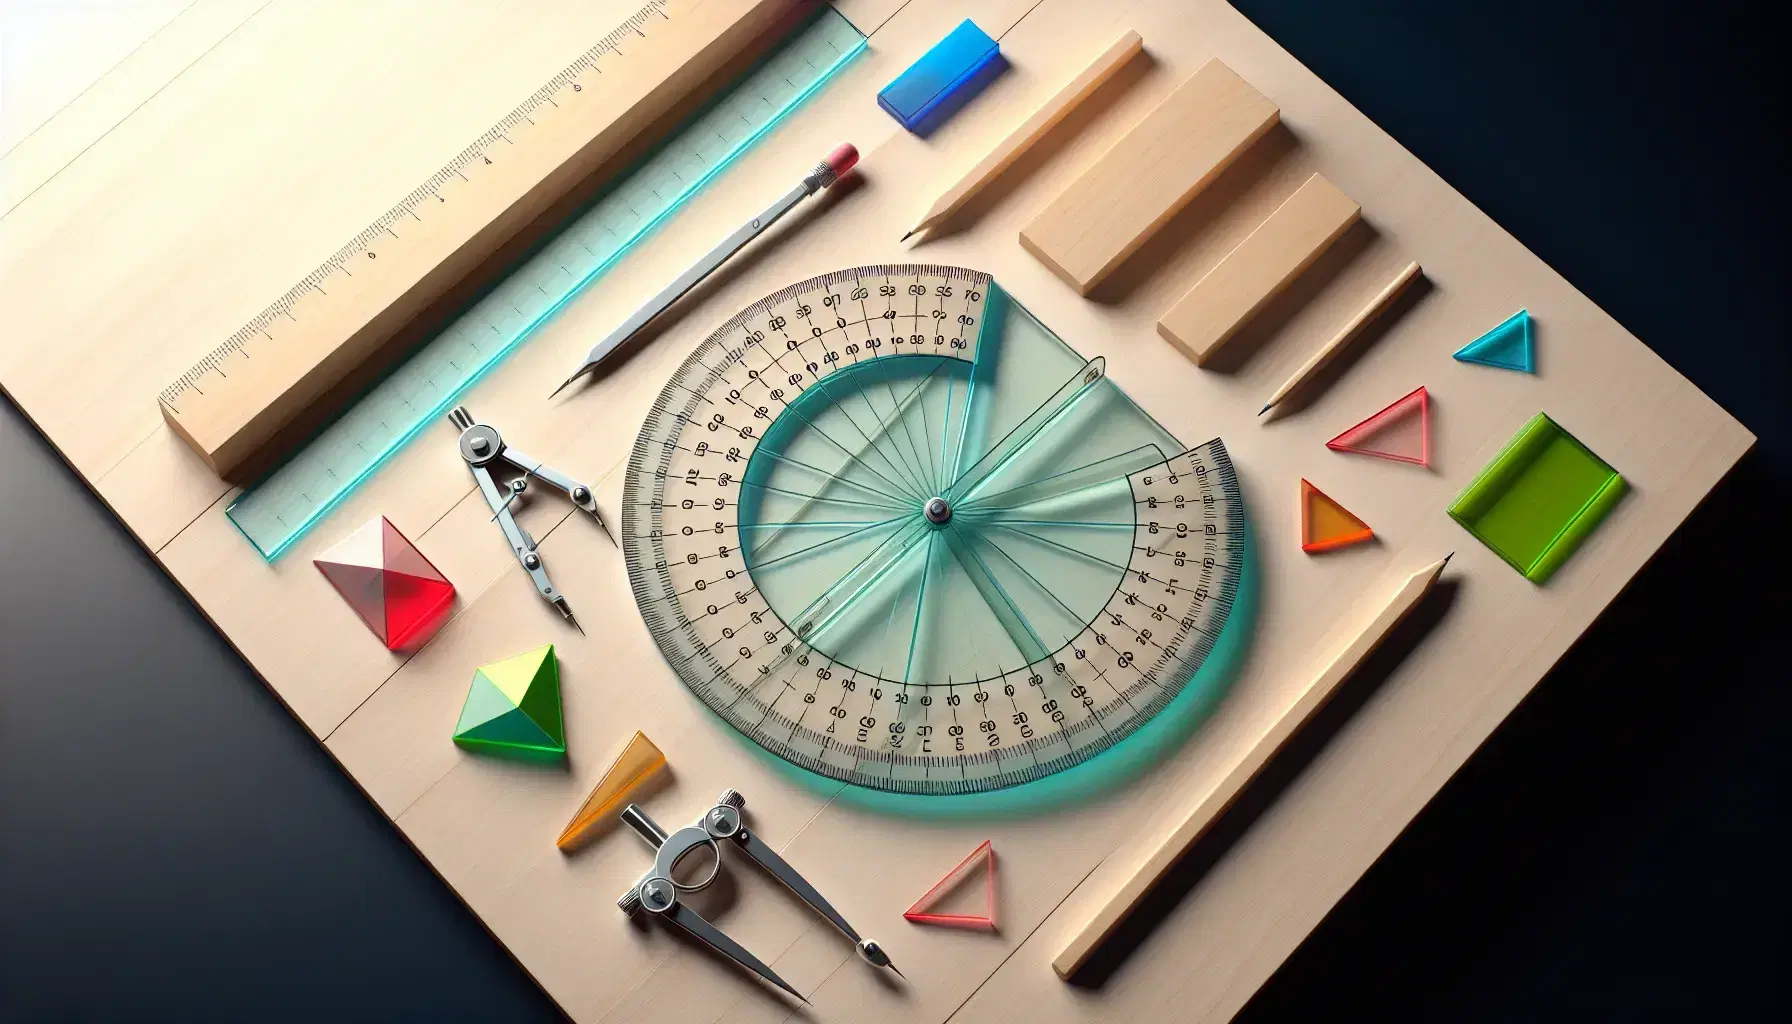 Assorted geometric tools on a wooden surface, including a clear protractor, metal compass, and colored shapes like a triangle, square, and rectangle.